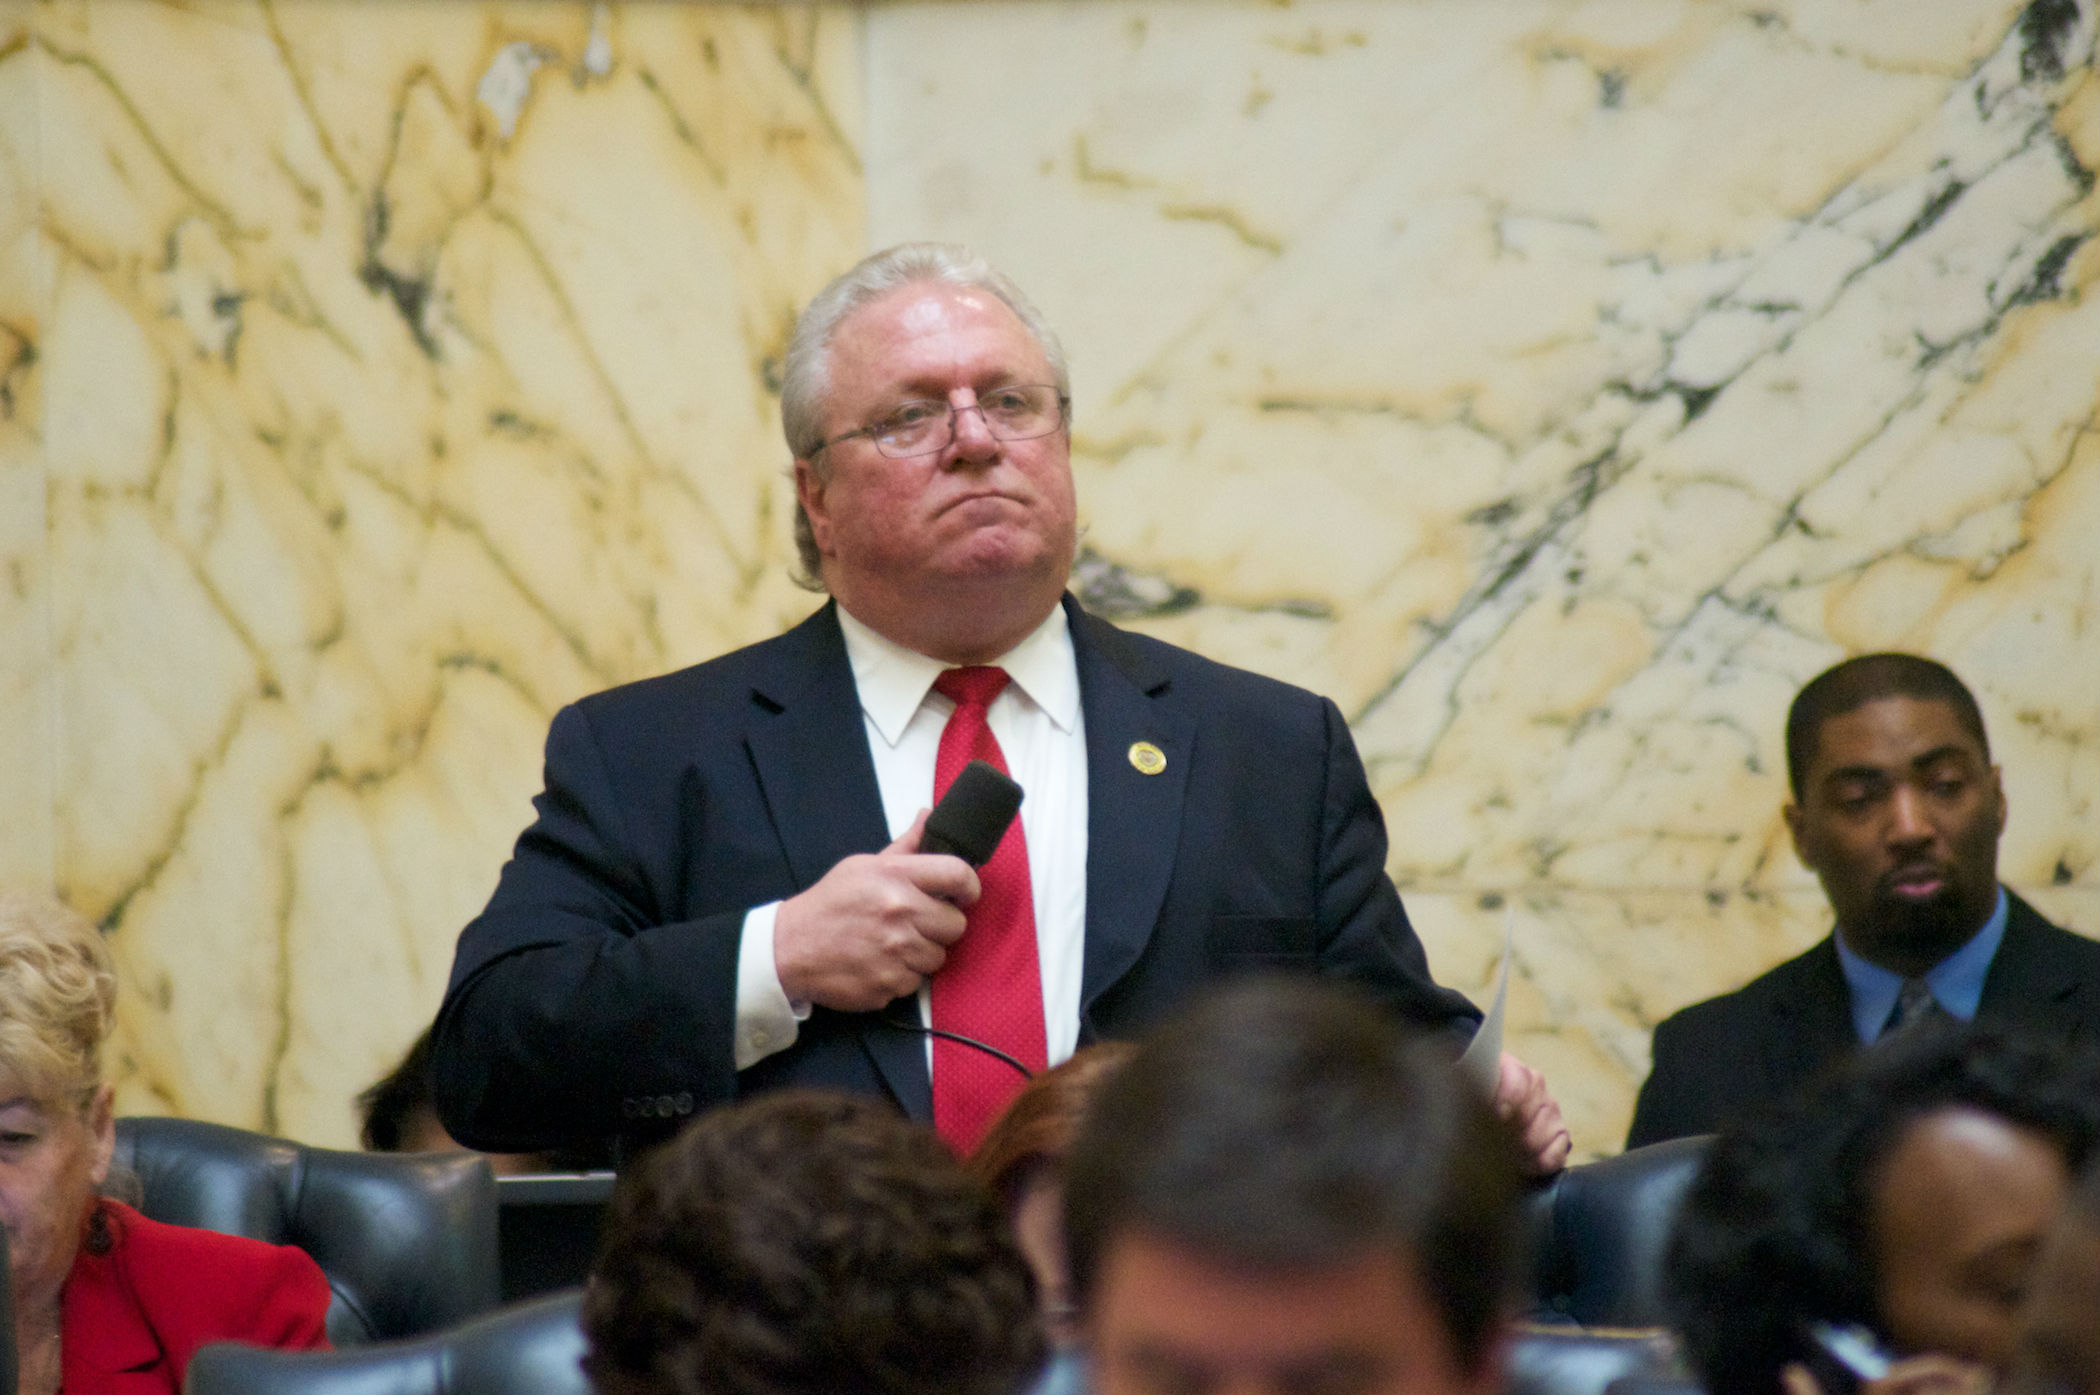 Small county fee hike leads to partisan rancor on House floor